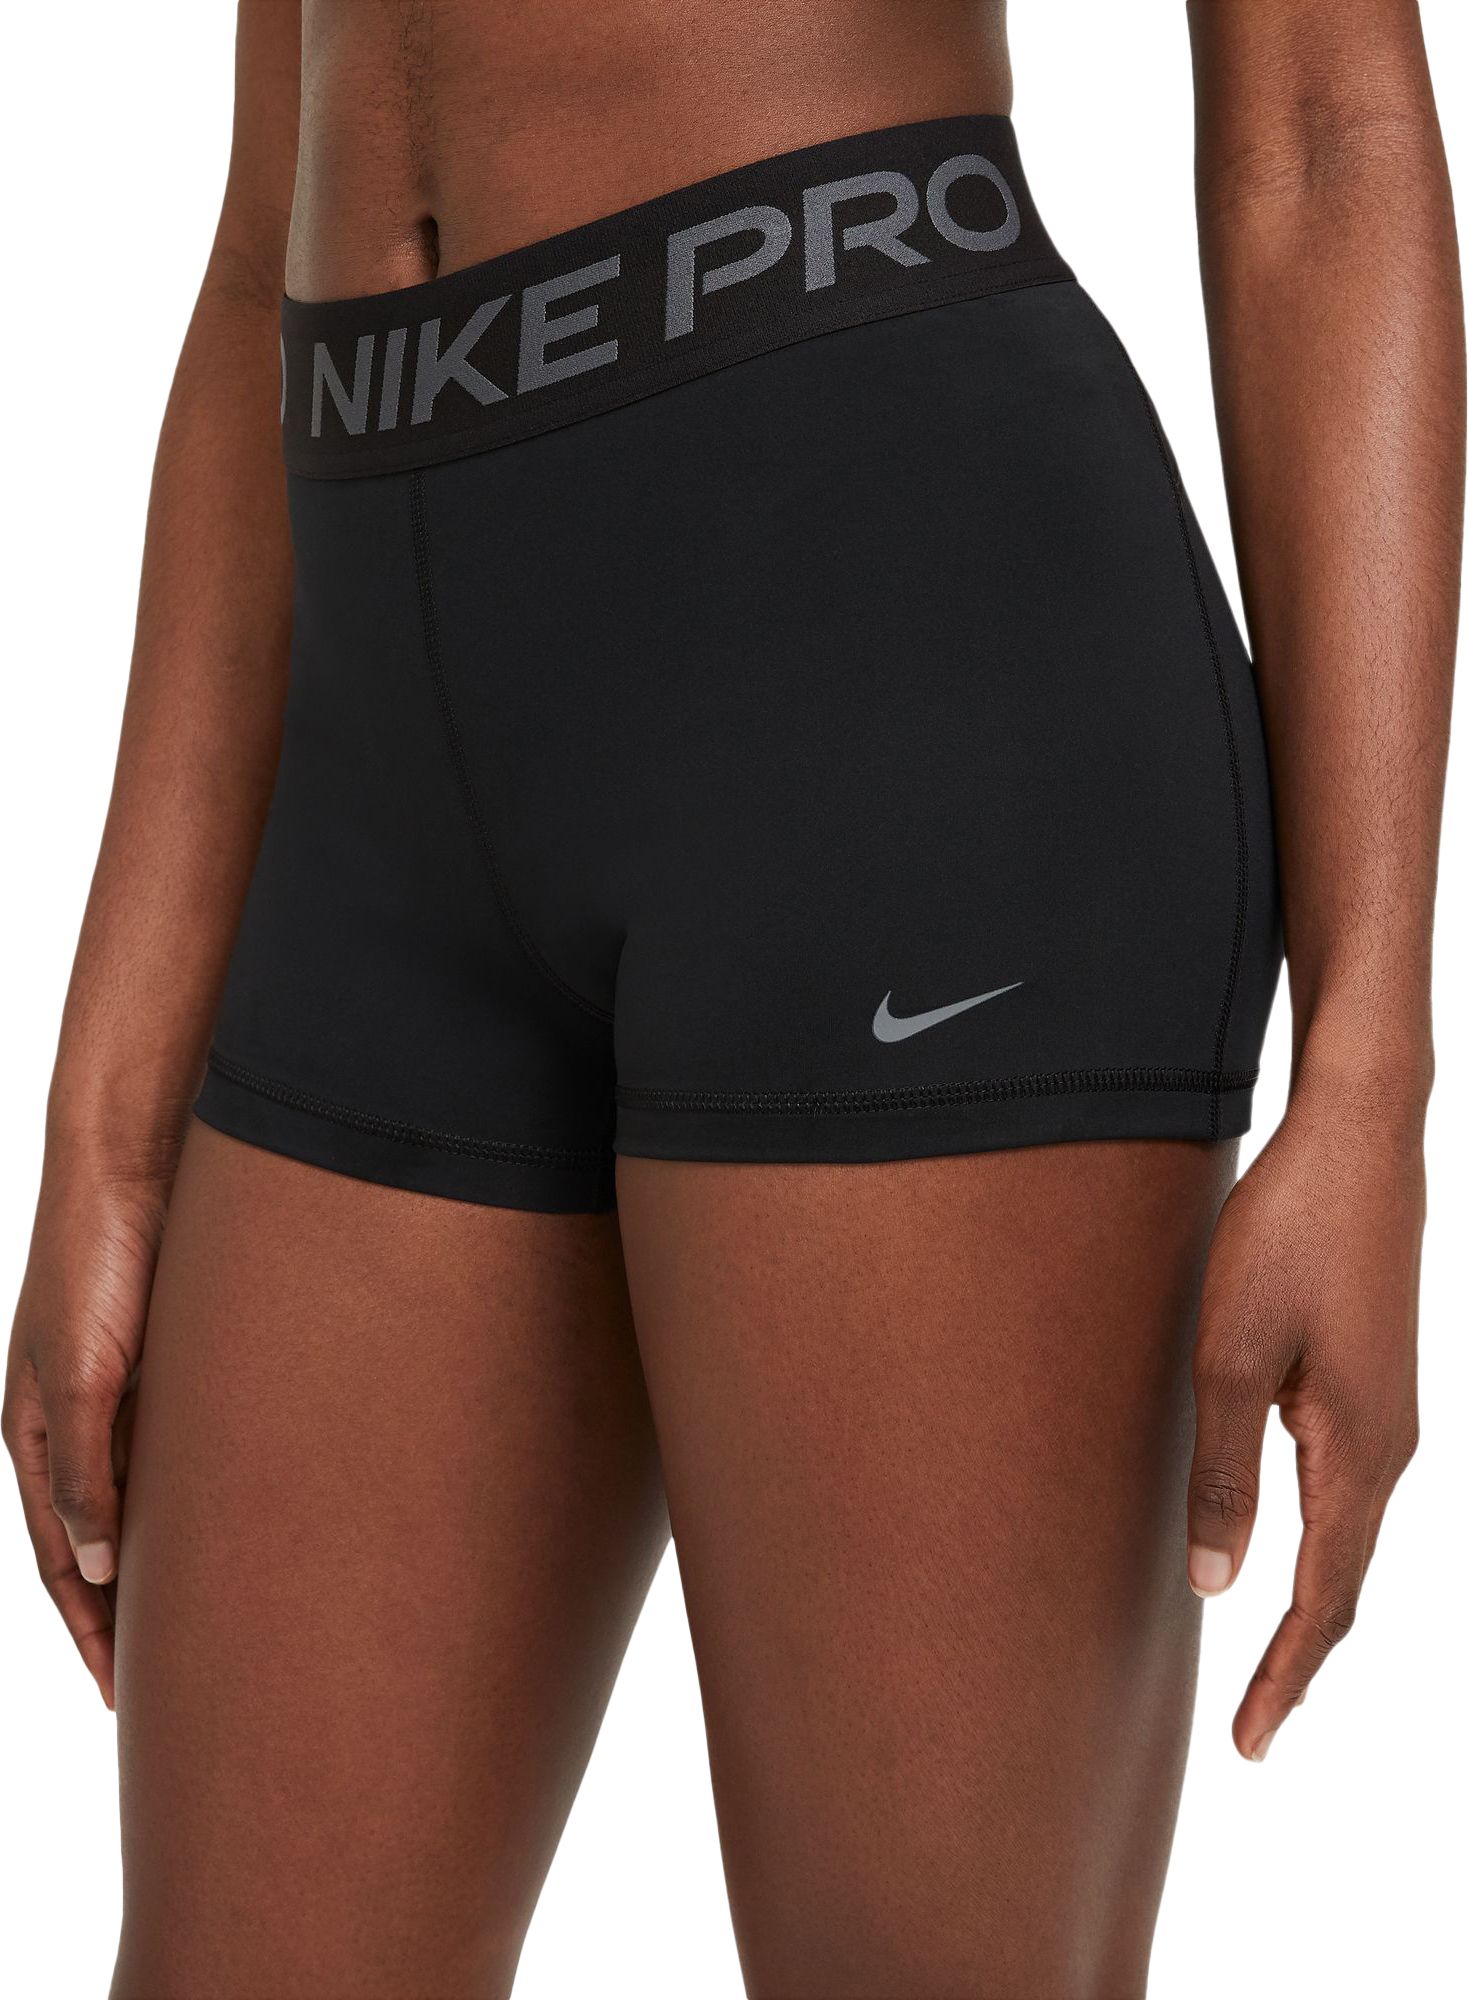 nike pro shorts about you